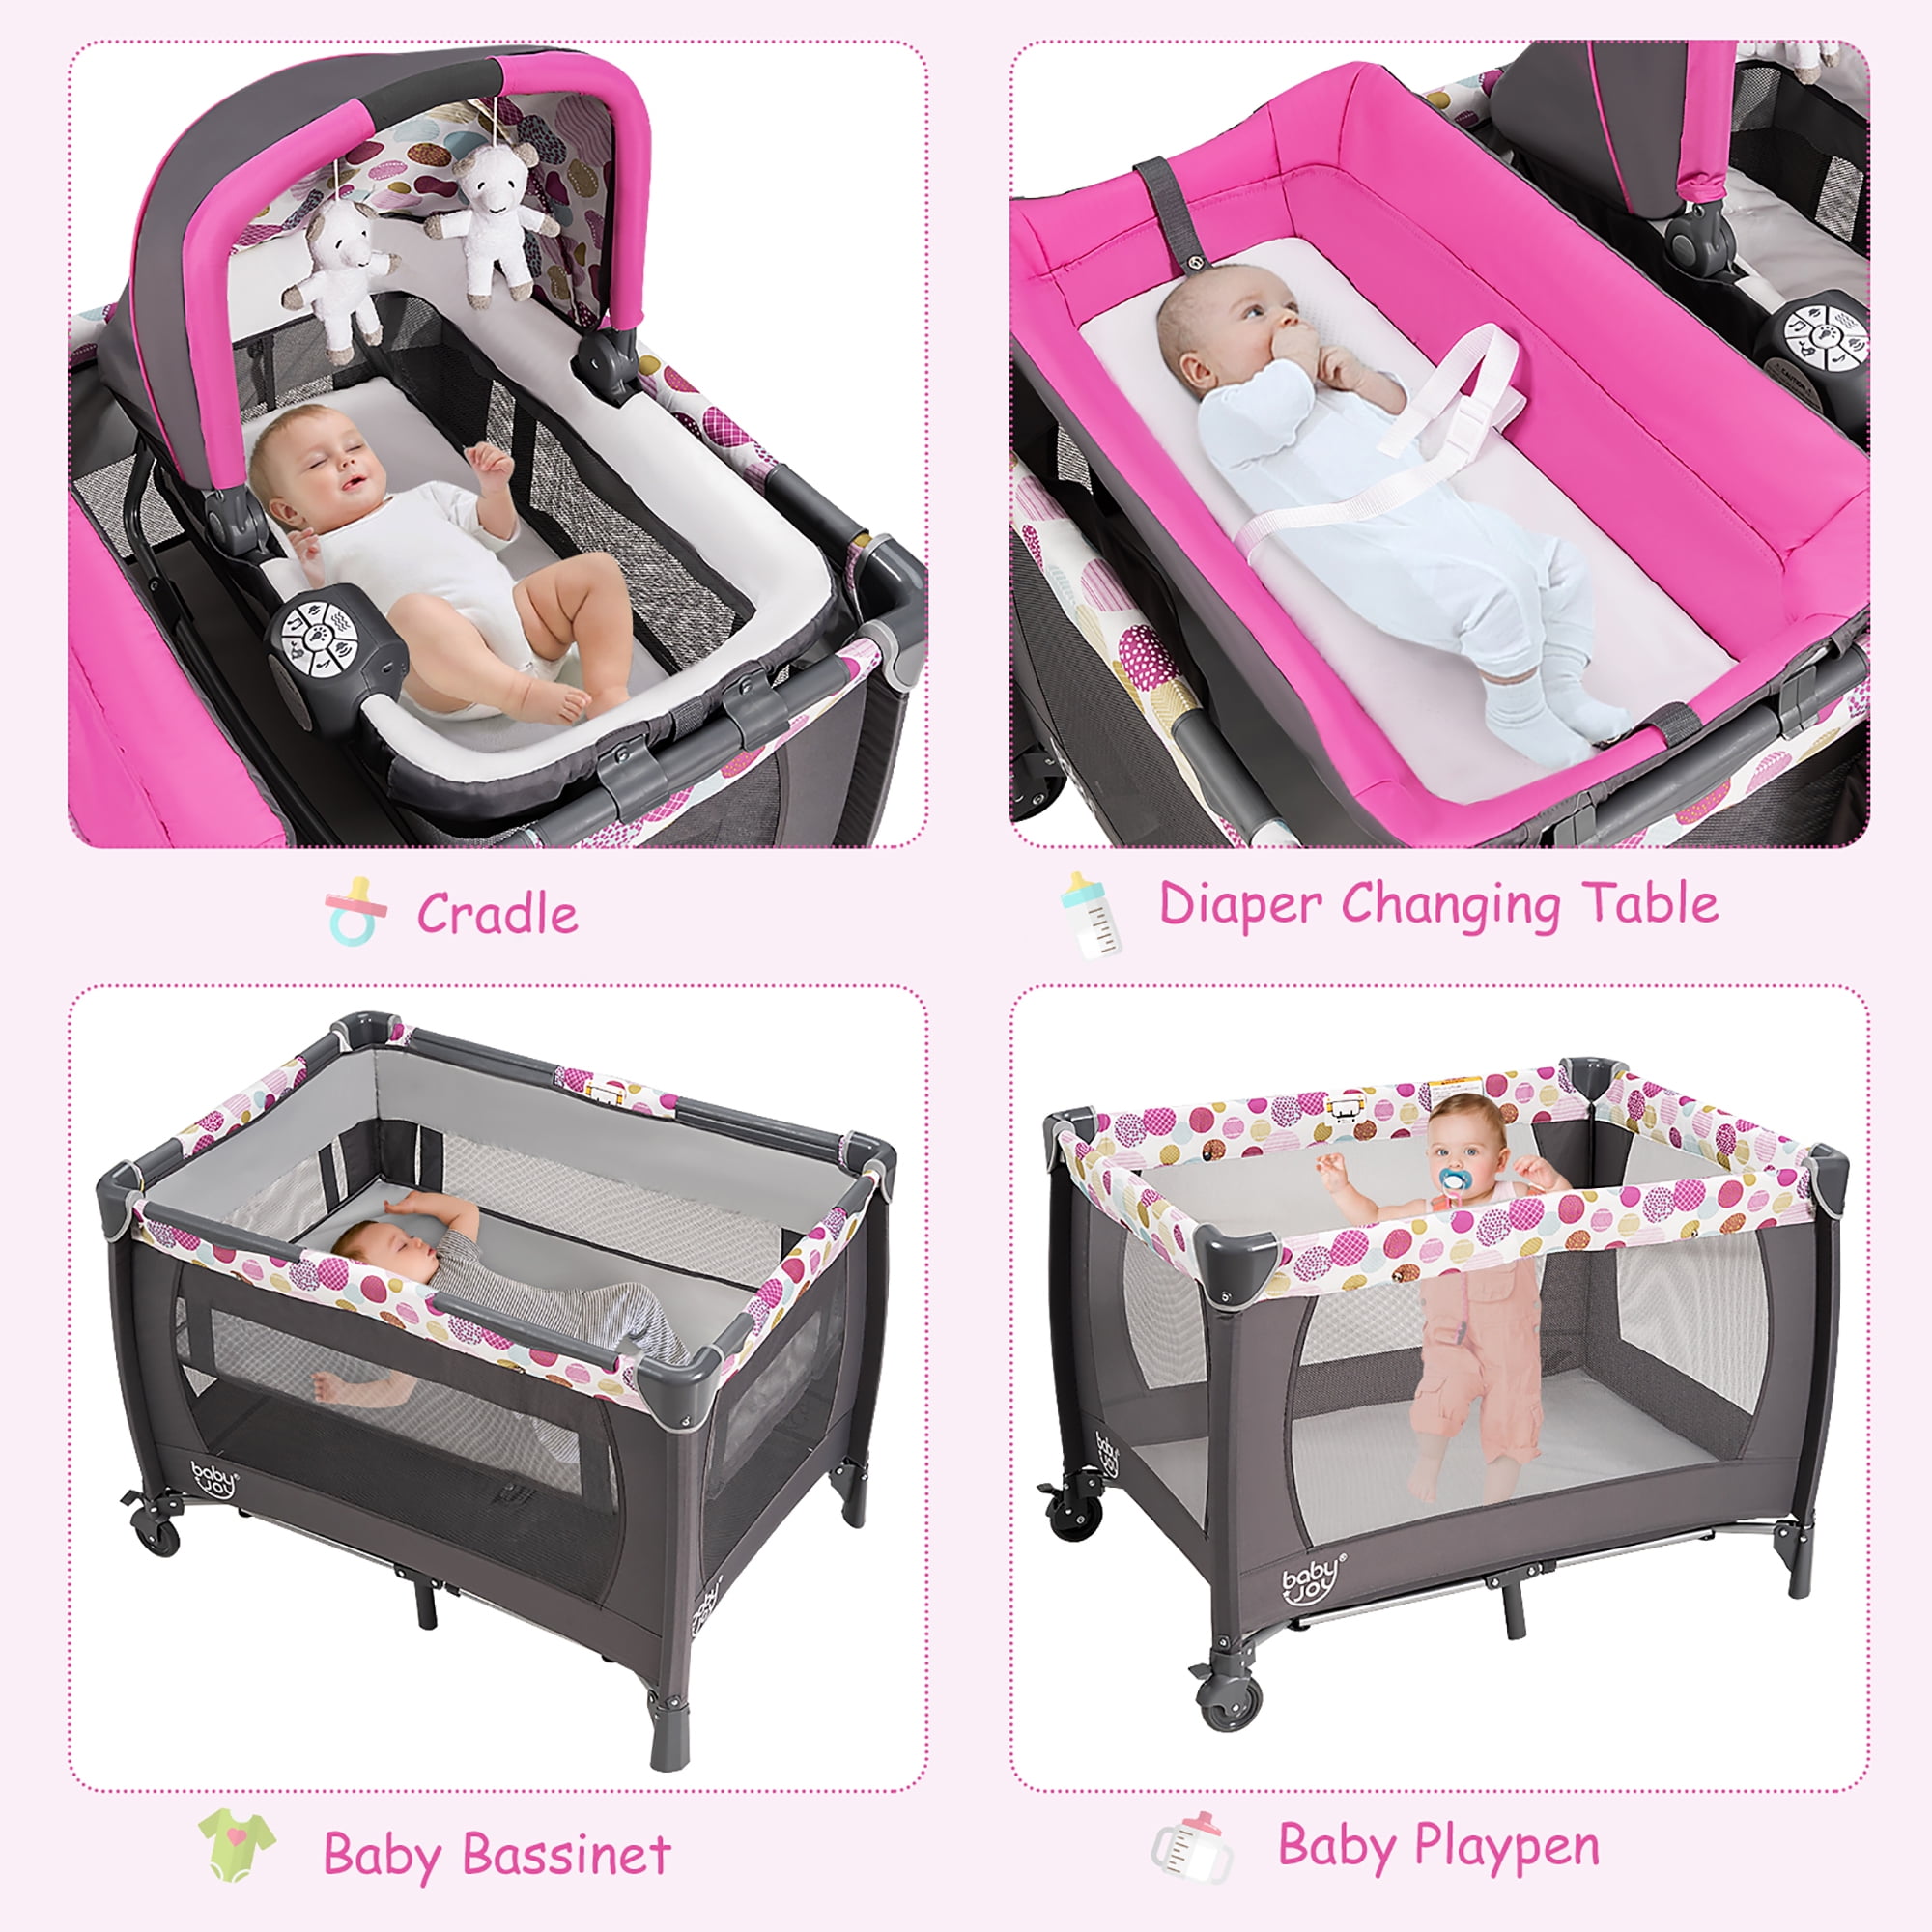 Cute Whirling Toys Pink Mesh Net 32 in Oxford Carry Bag BABY JOY Portable Playard Foldable Bassinet Bed with Music Box Wheels & Brake 4 in 1 Convertible Baby Playpen with Changing Table 